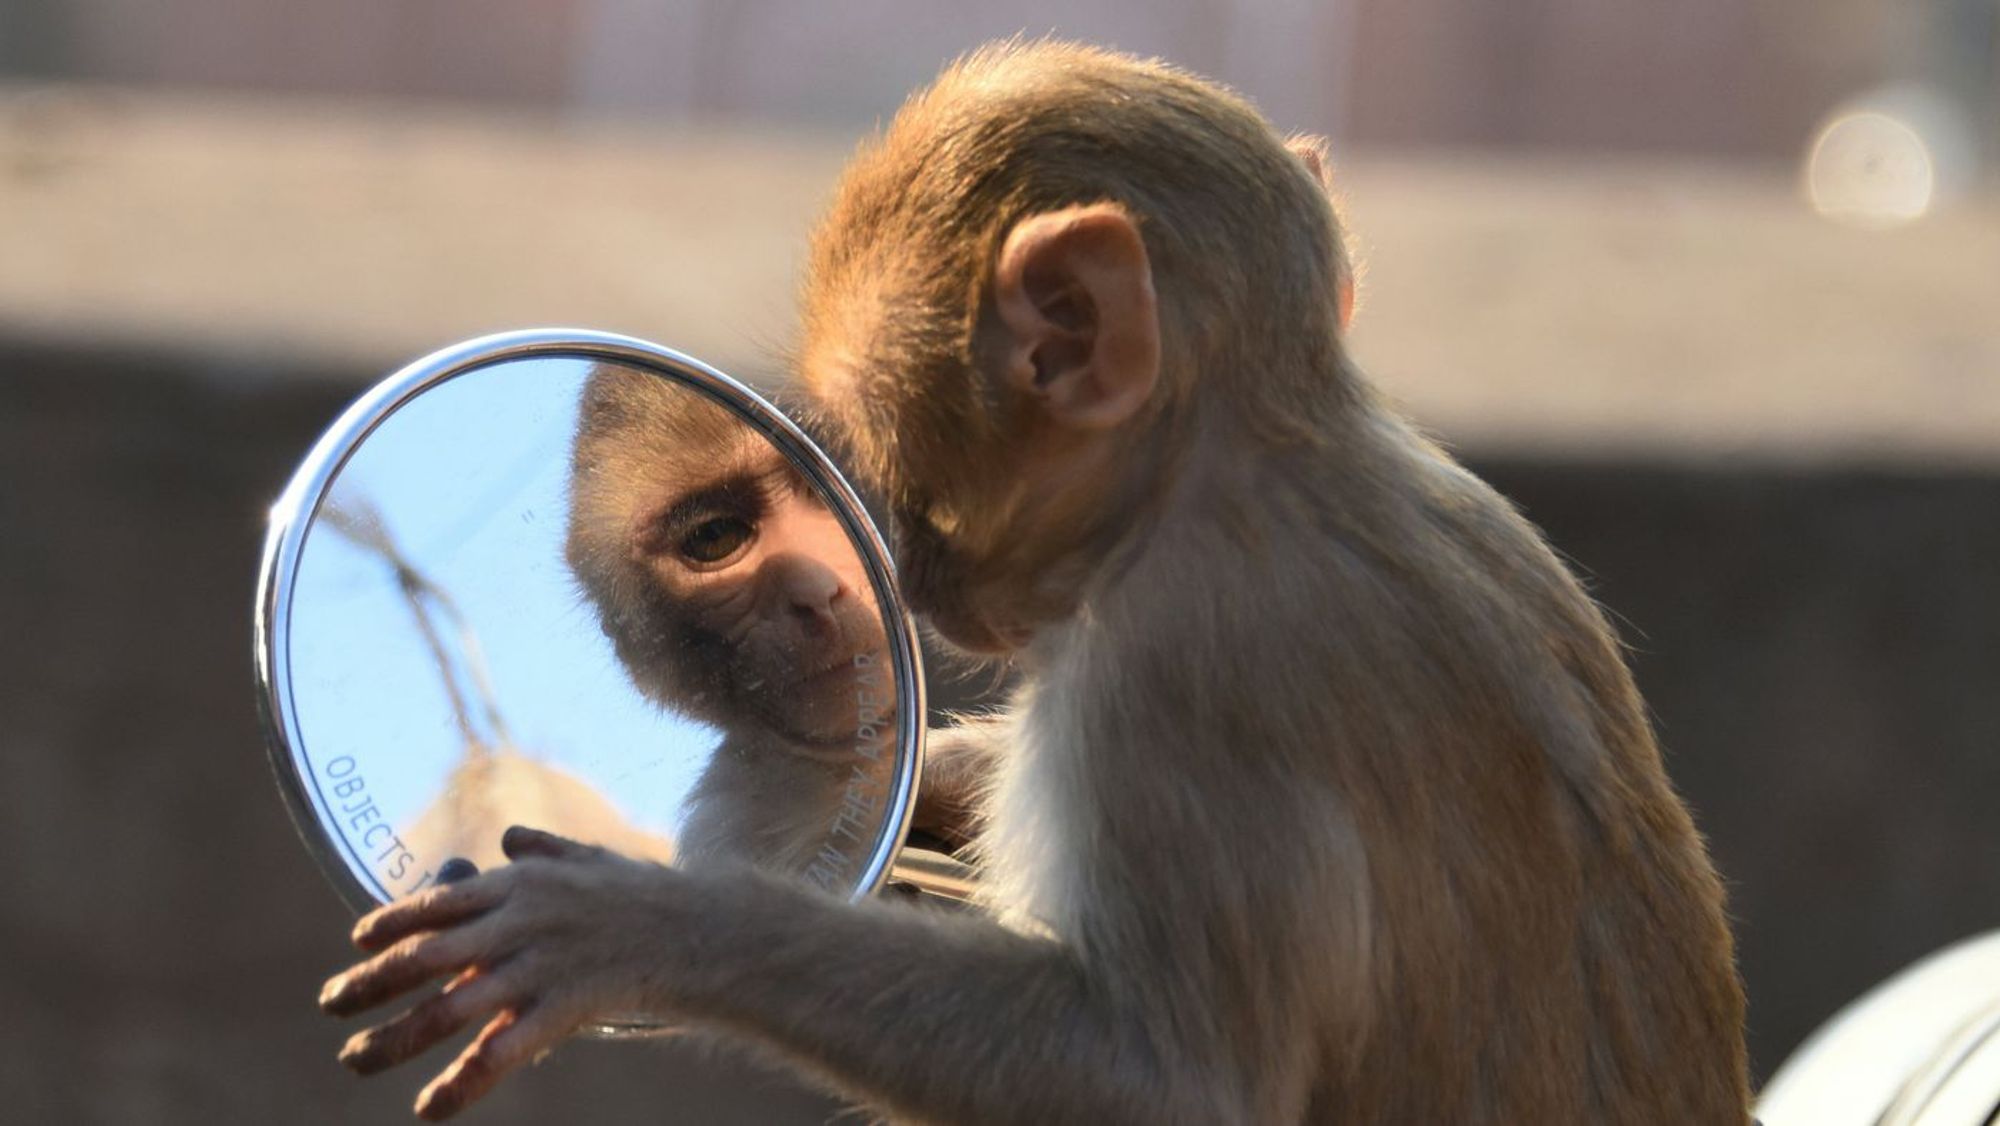 Introducing the AI Mirror Test, which very smart people keep failing